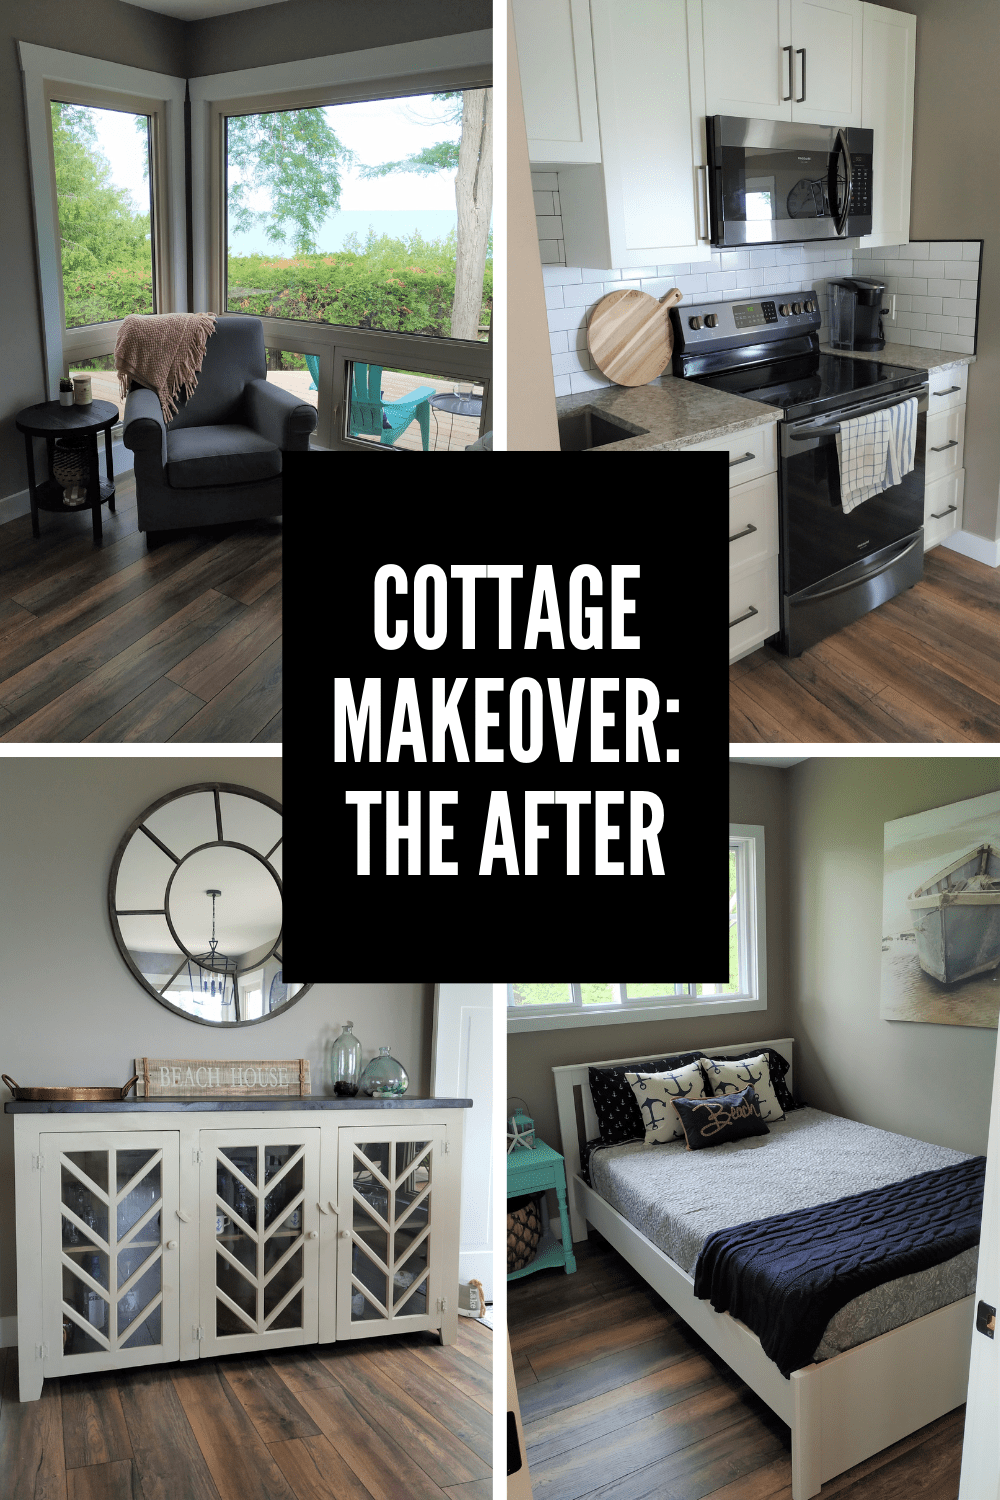 Collage of a cottage makeover with text overlay.